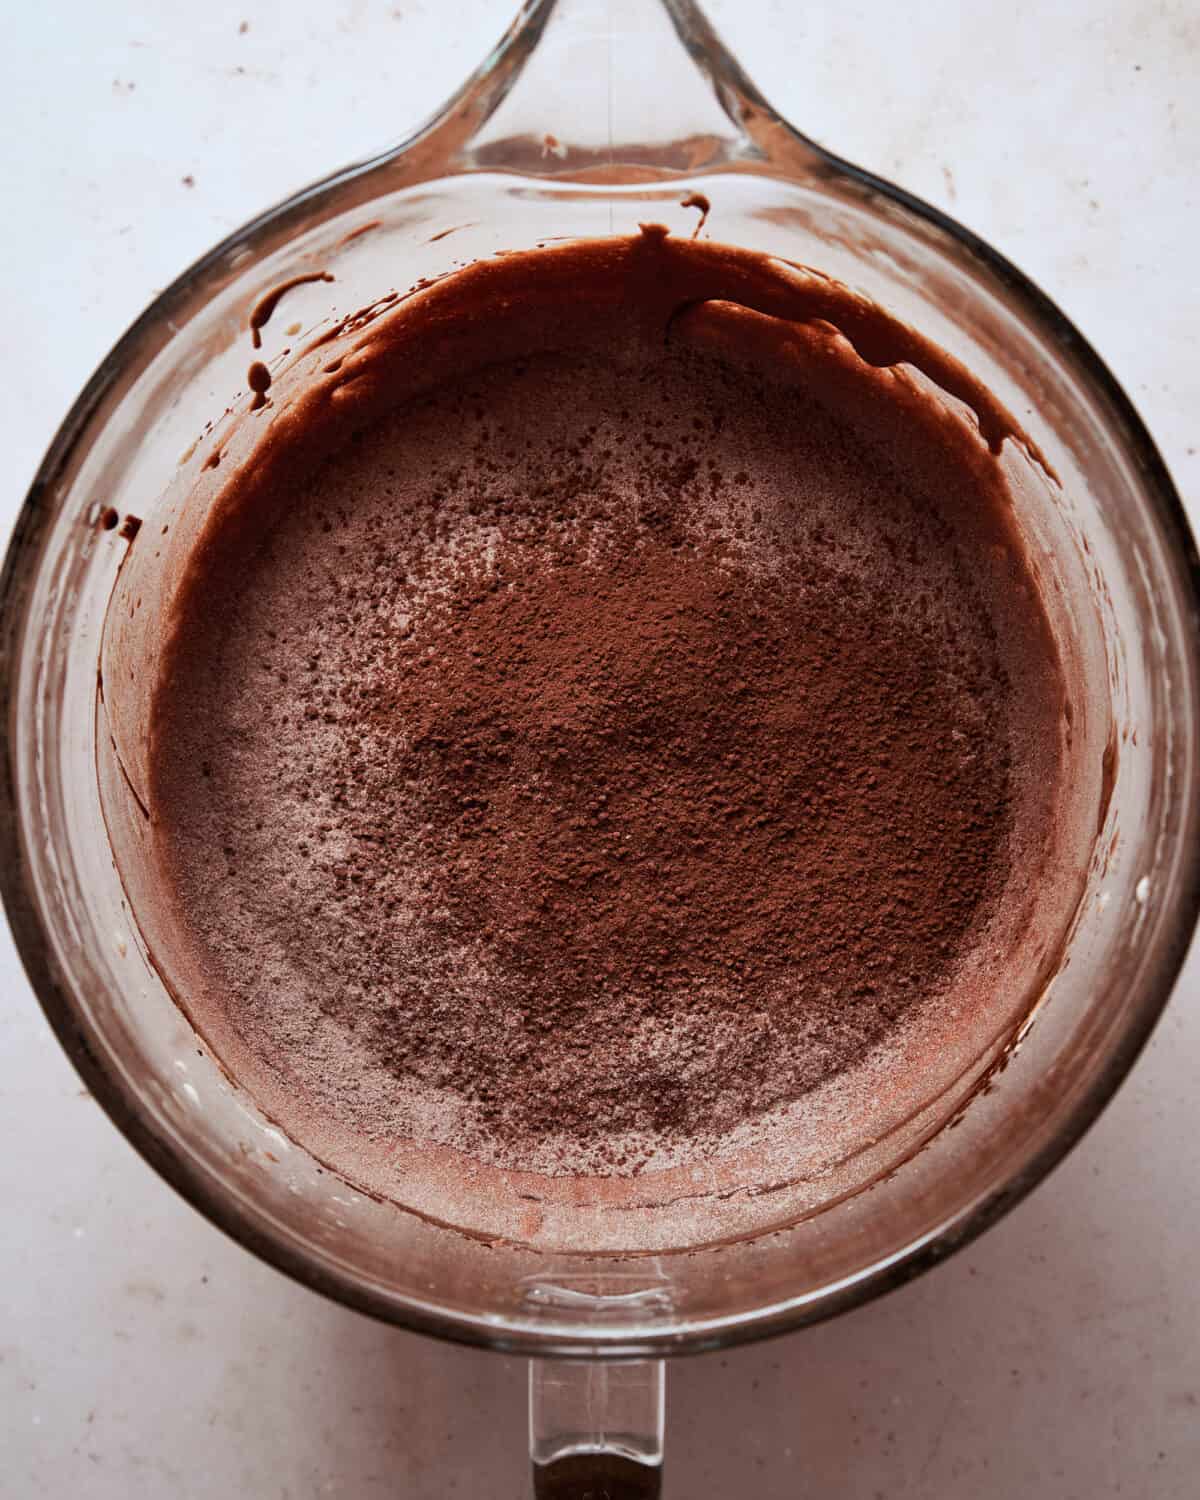 Cocoa powder and flour added to the chocolate batter.